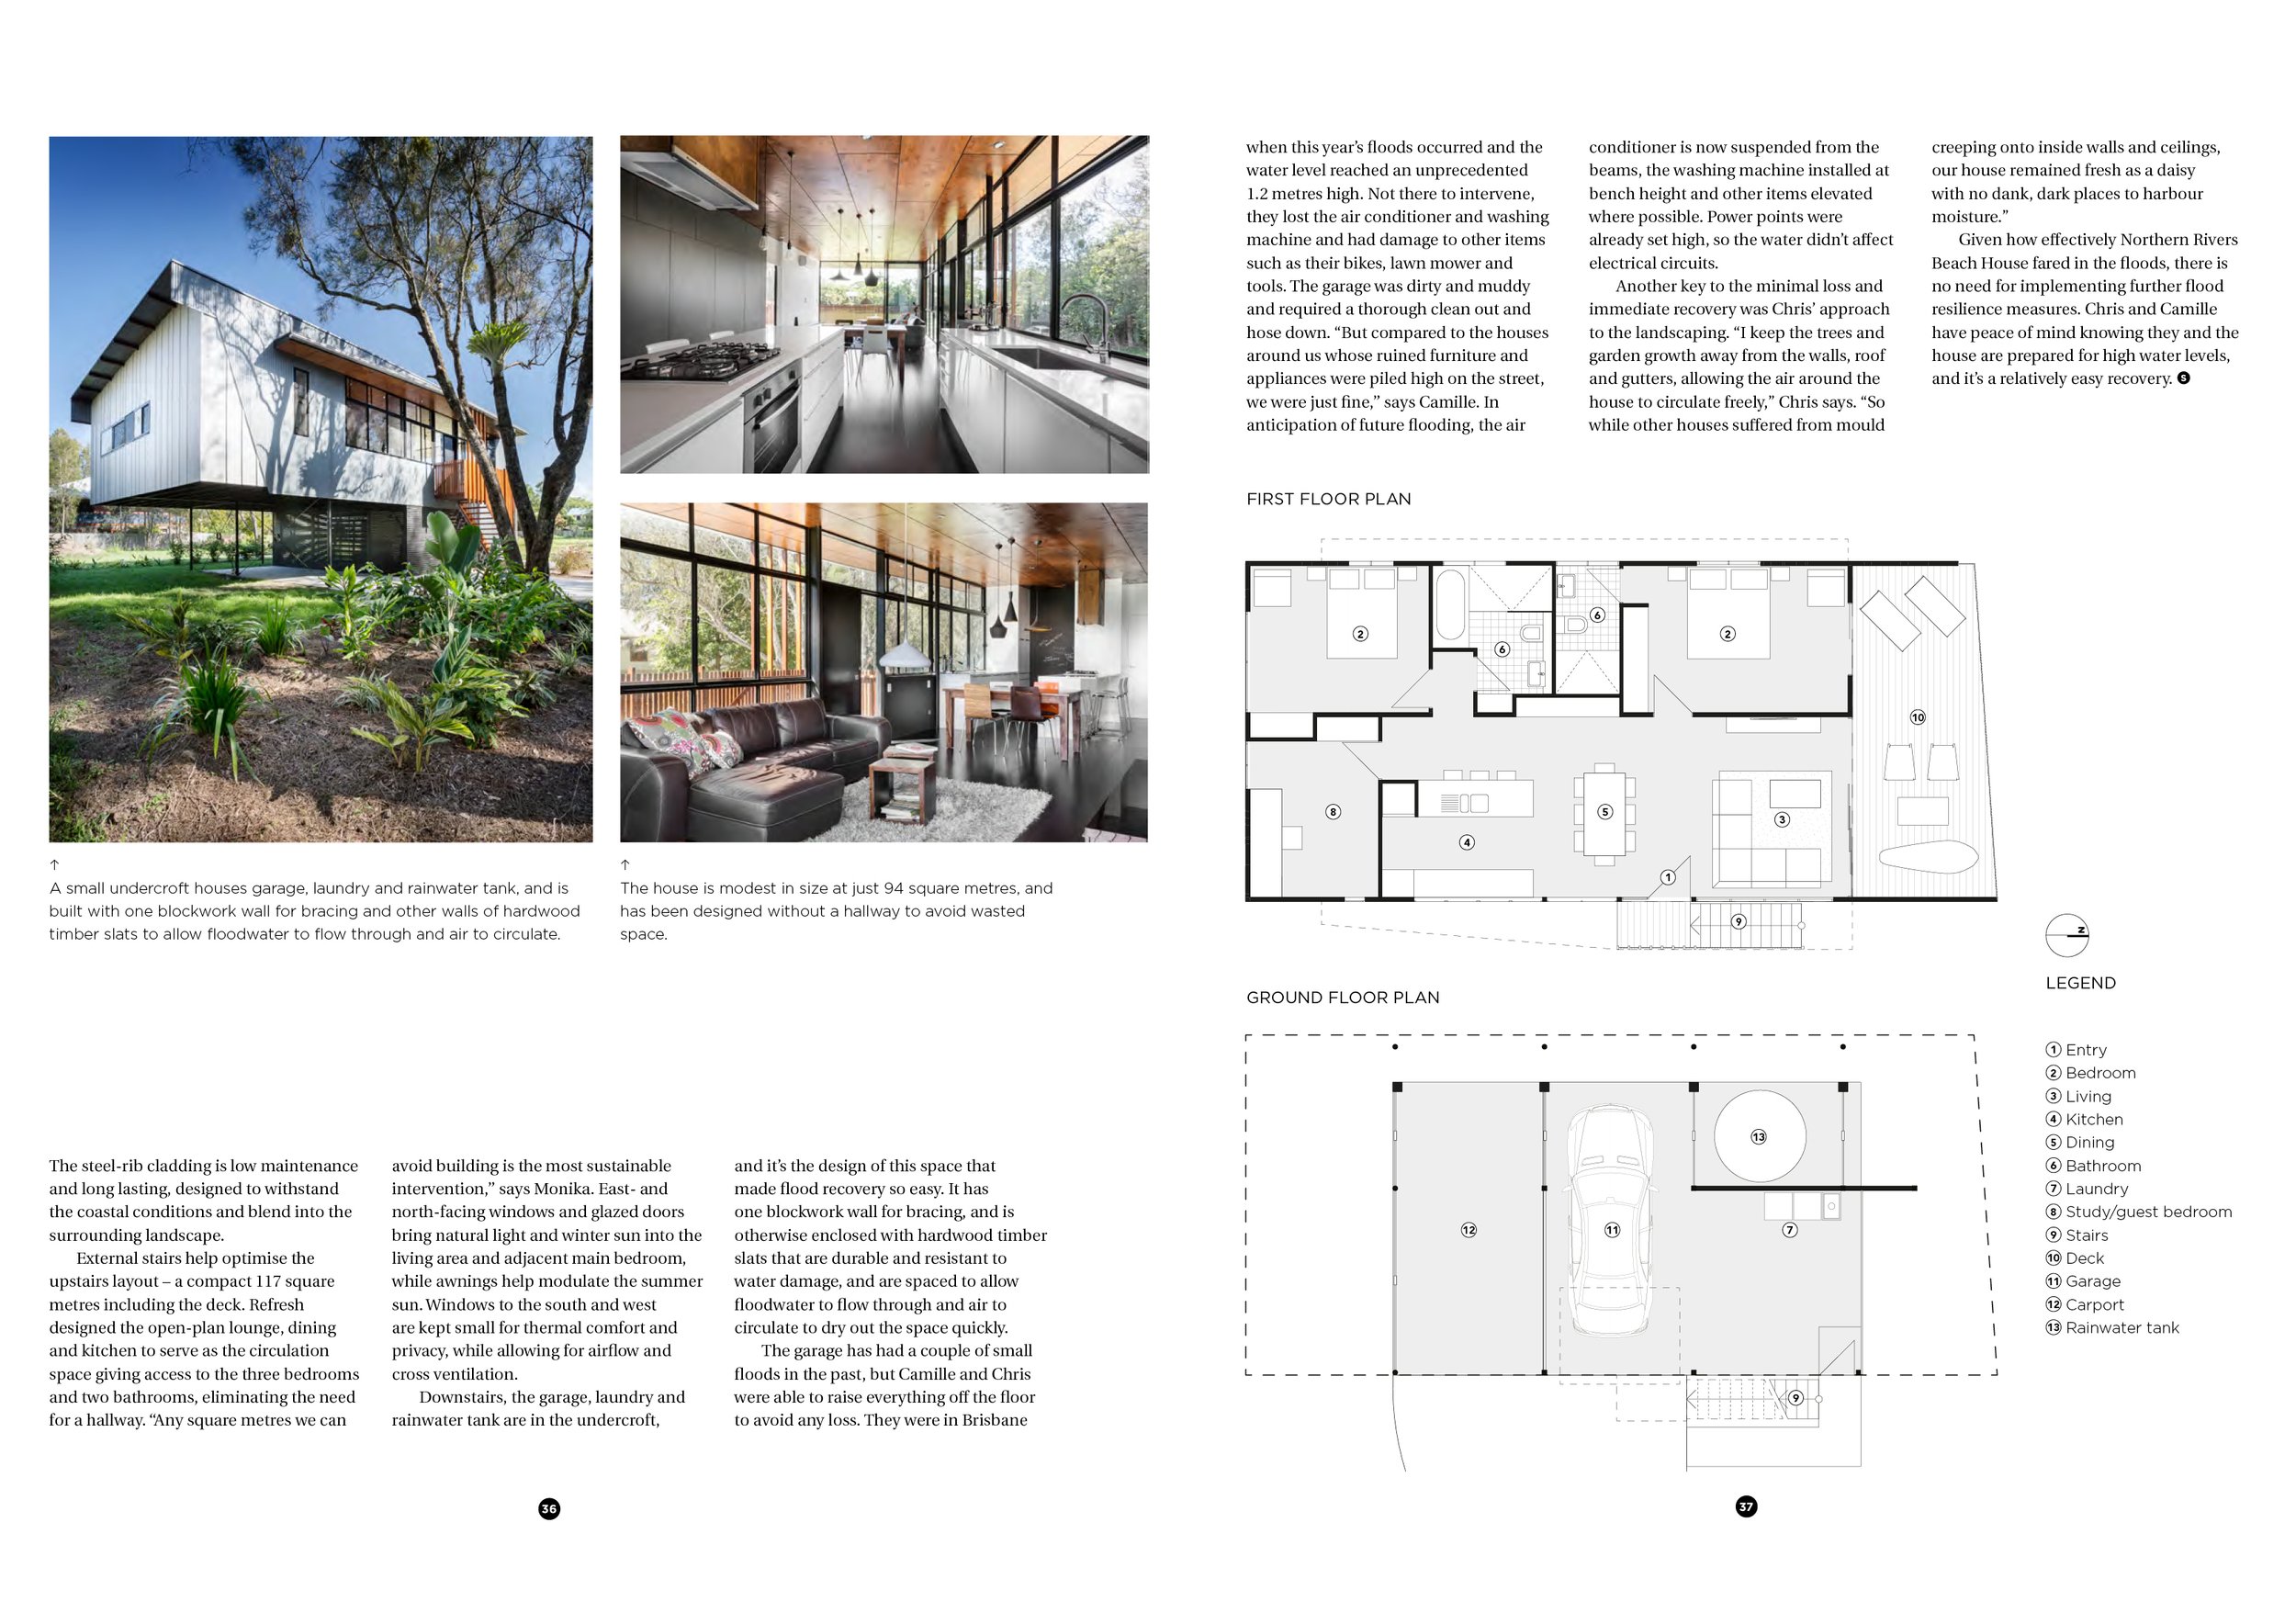 Sanctuary Issue 60_Northern Rivers Beach House_2.jpg